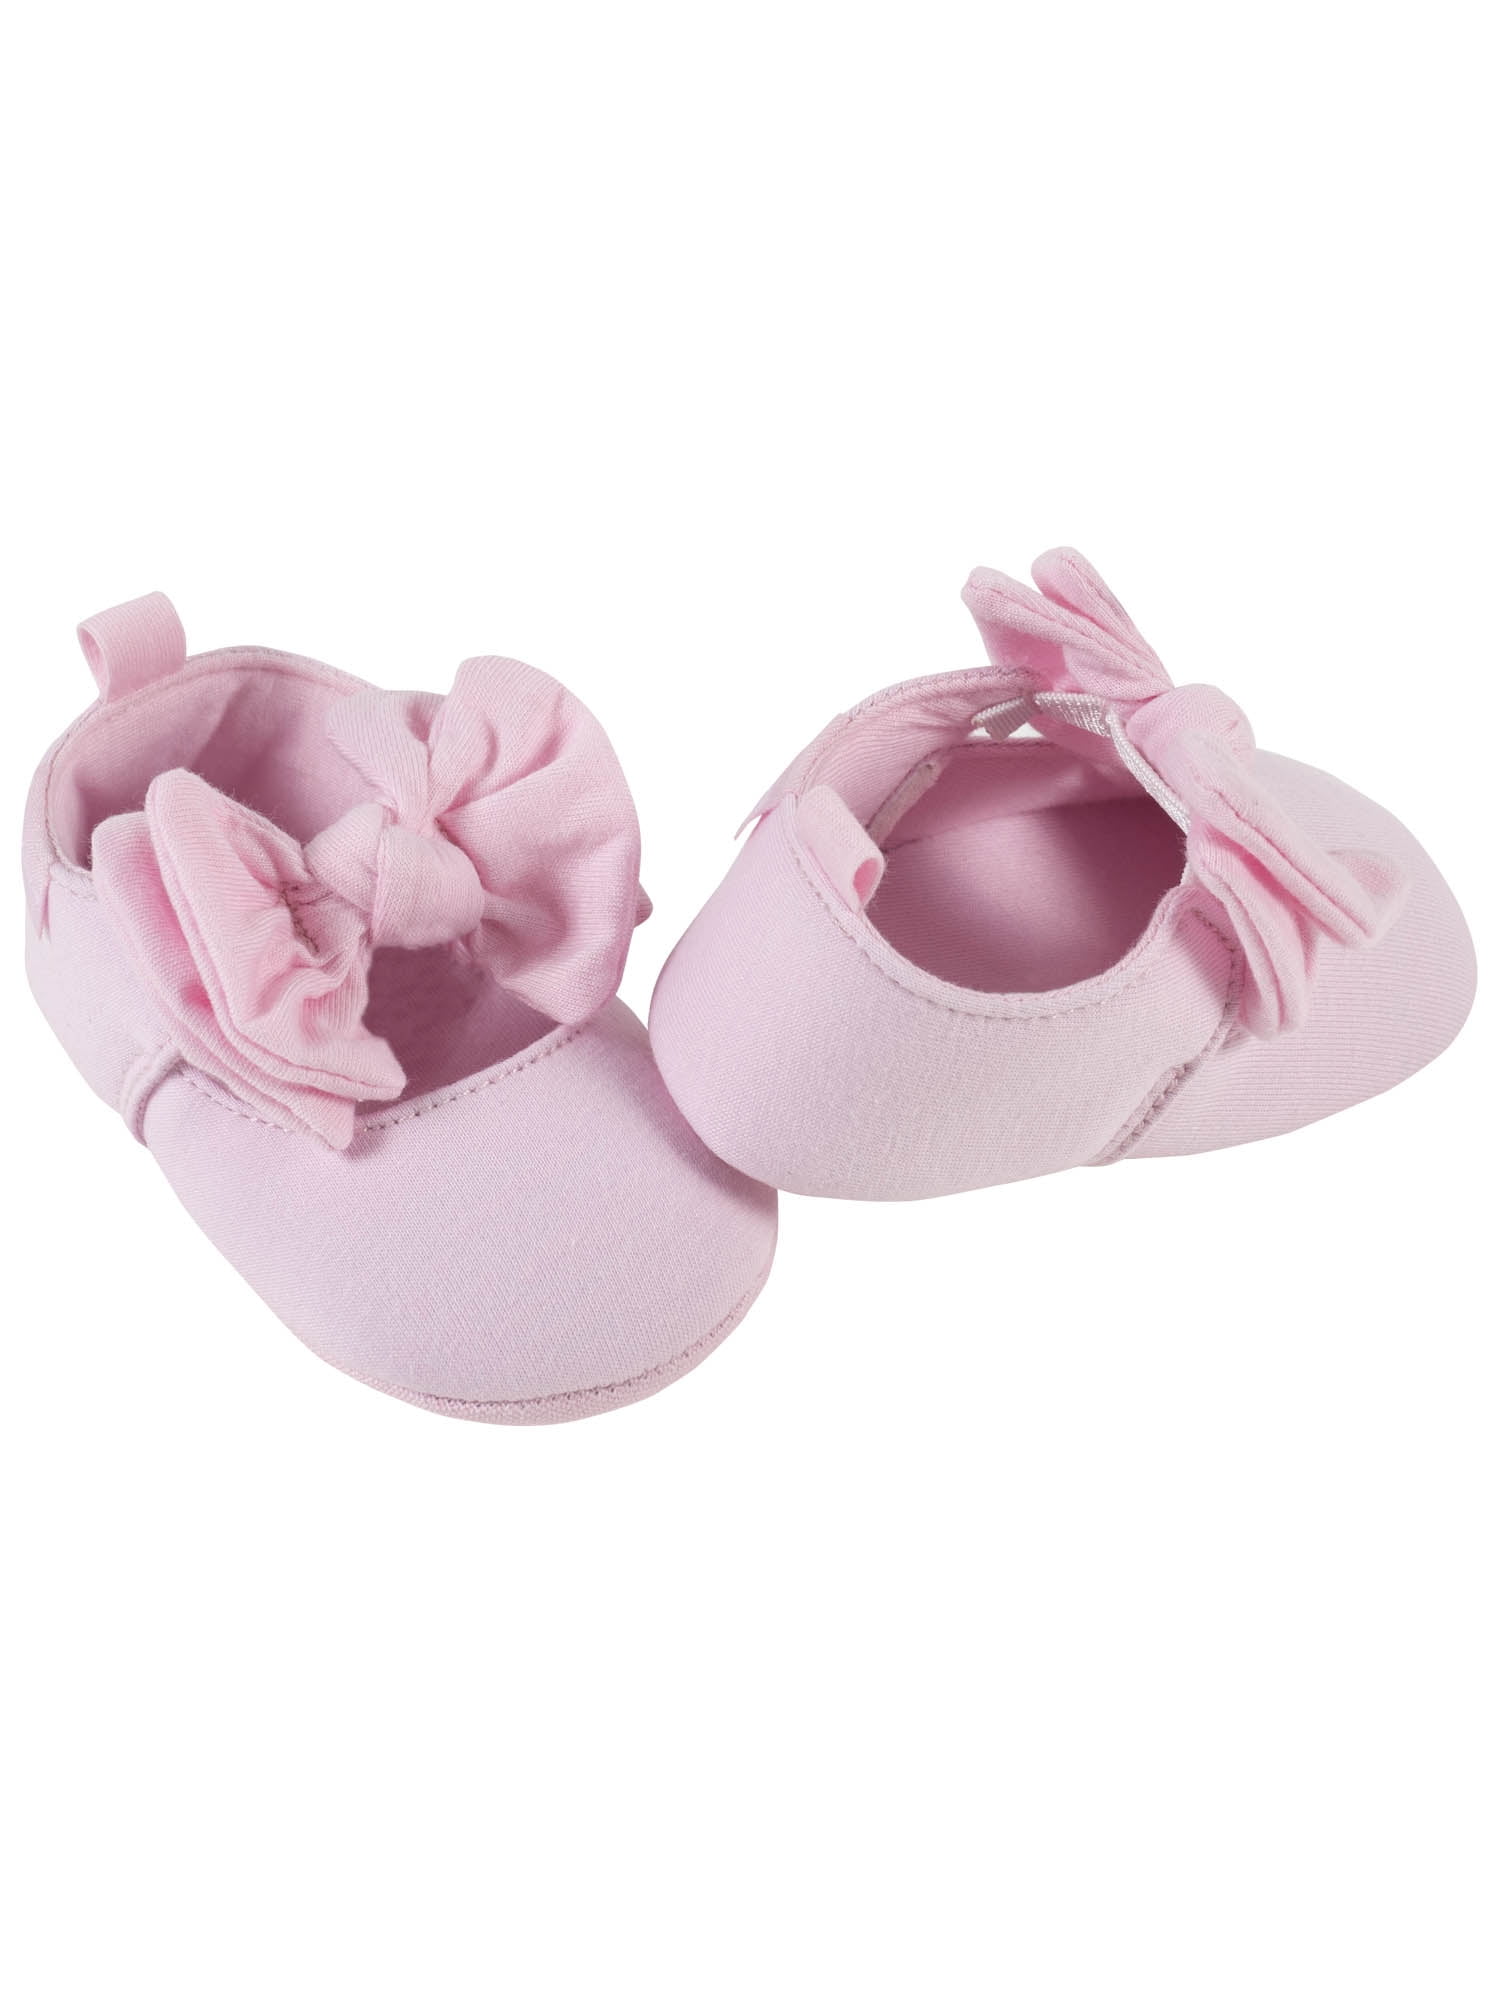 Baby Girl's White Pink Red Infant Kids Shoes Size 6-9 Months 